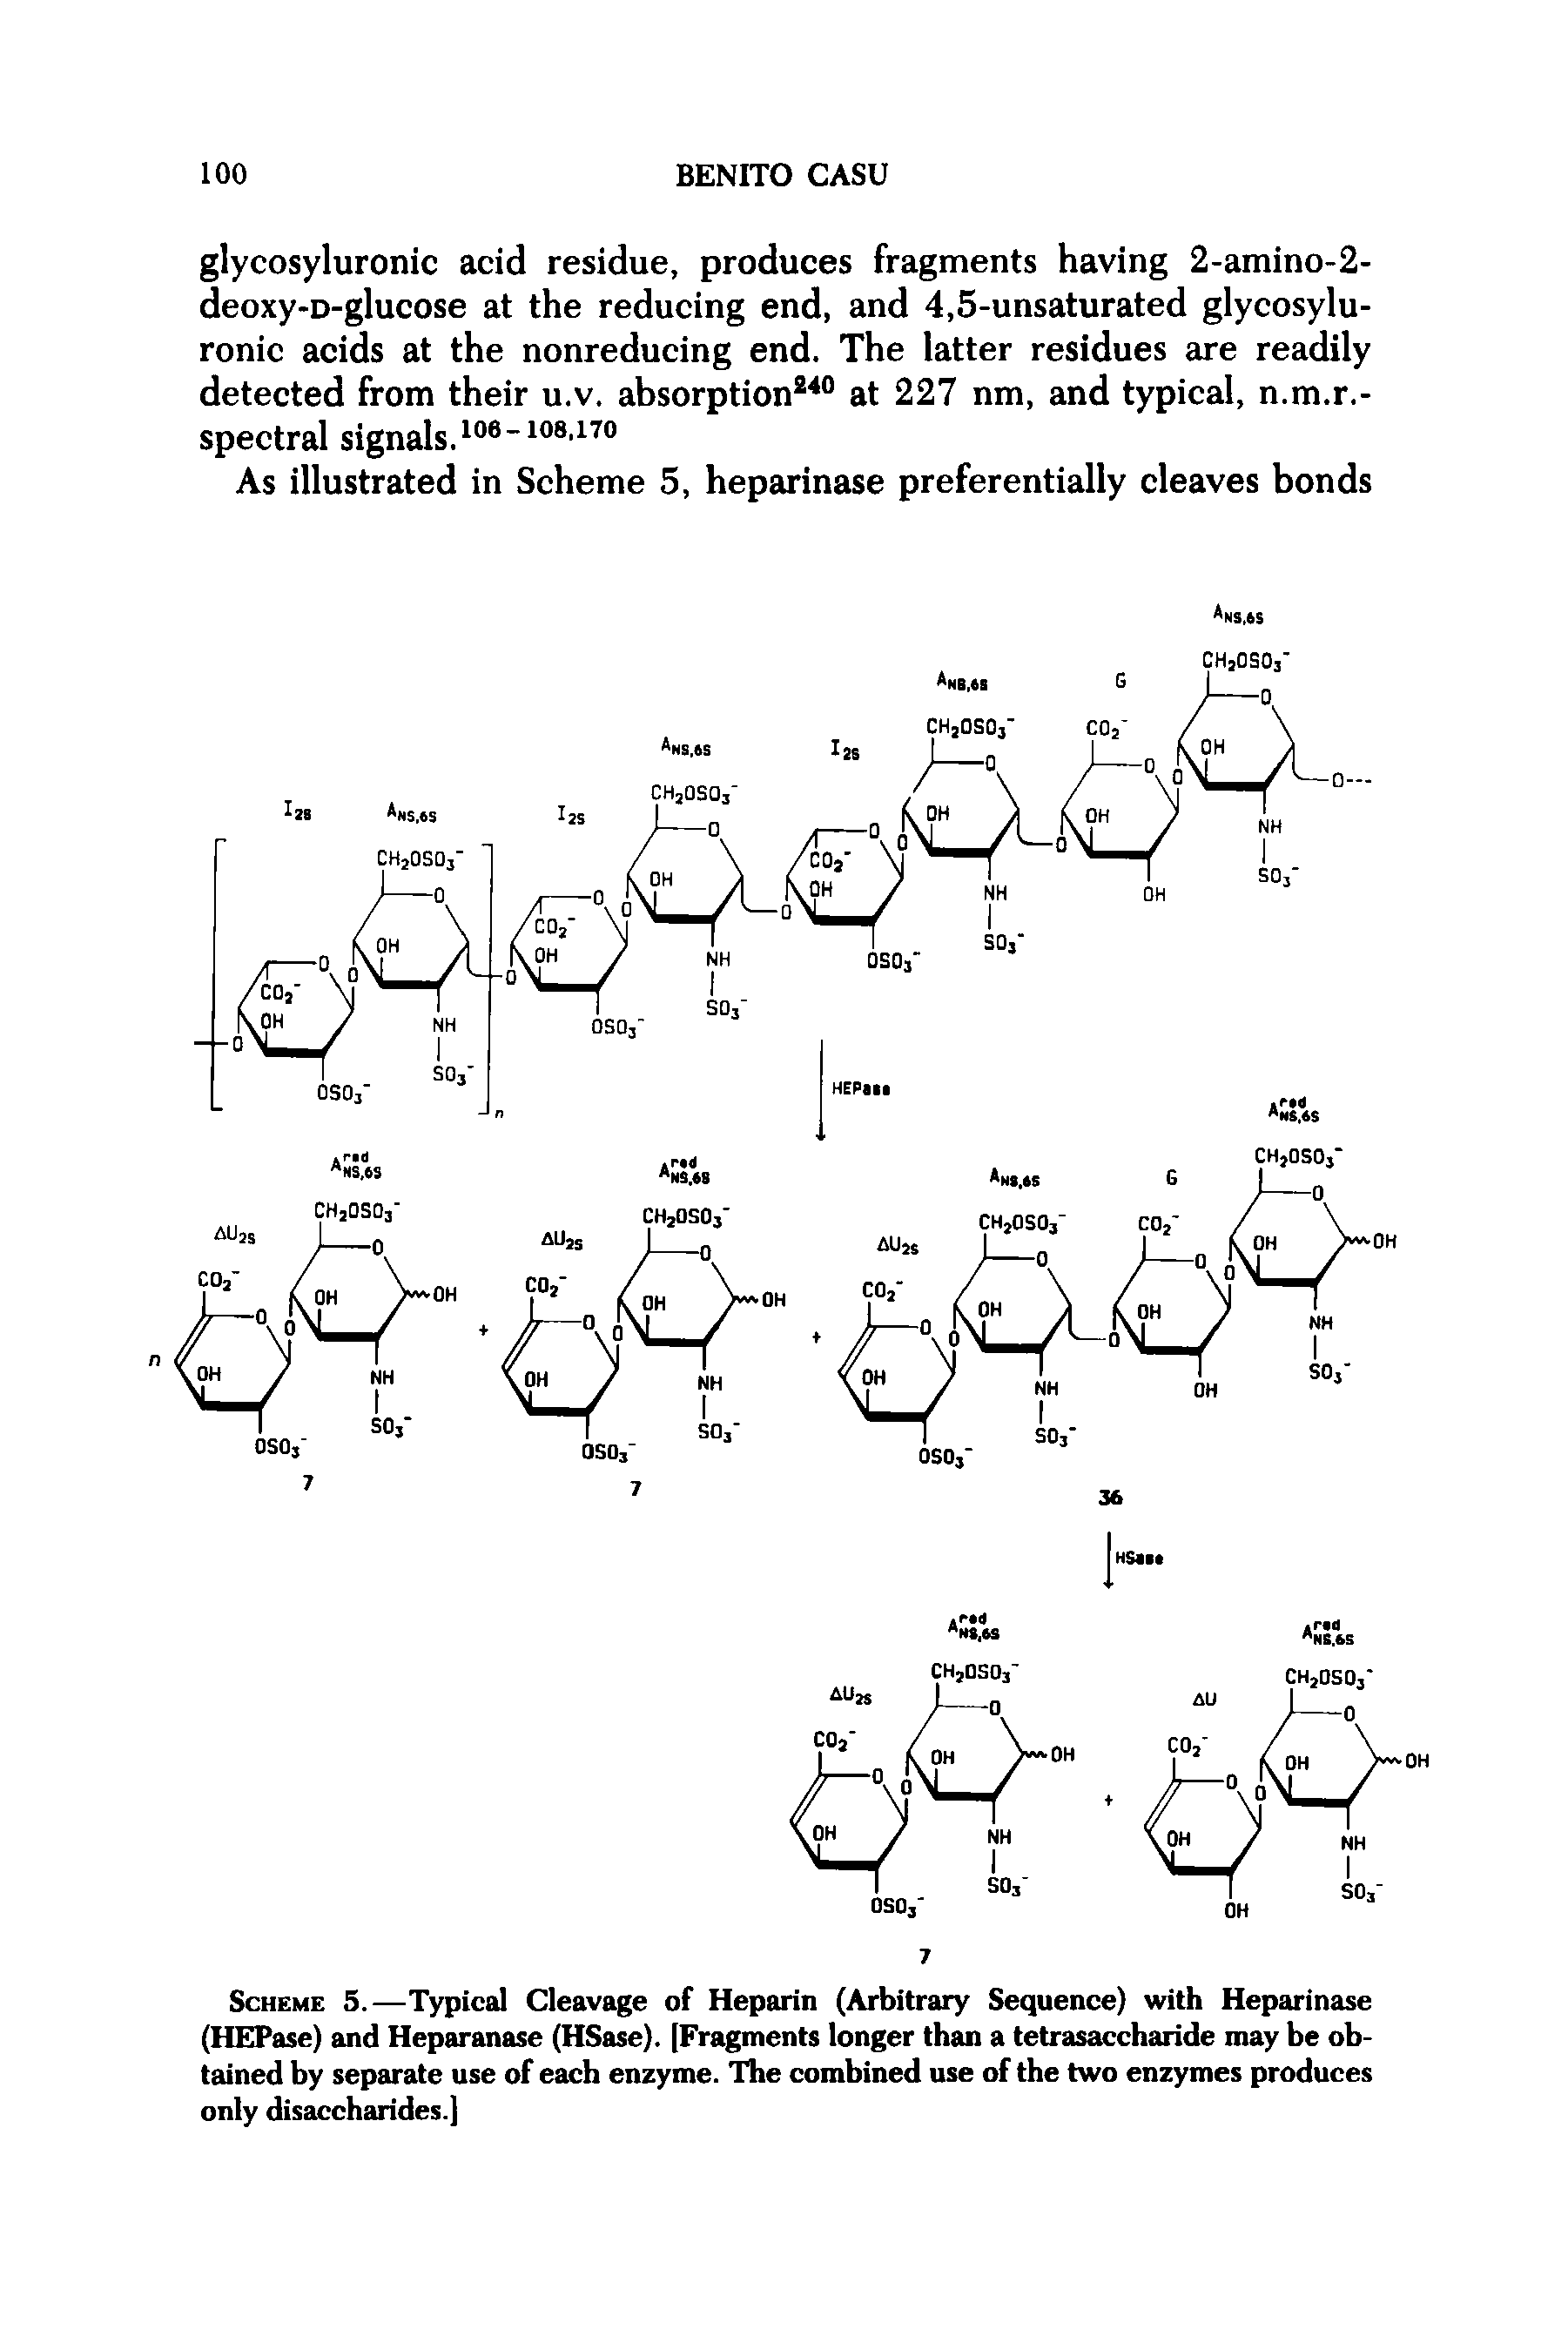 Scheme 5.—Typical Cleavage of Heparin (Arbitrary Sequence) with Heparinase (HEPase) and Heparanase (HSase). [Fragments longer than a tetrasaccharide may be obtained by separate use of each enzyme. The combined use of the two enzymes produces only disaccharides.]...